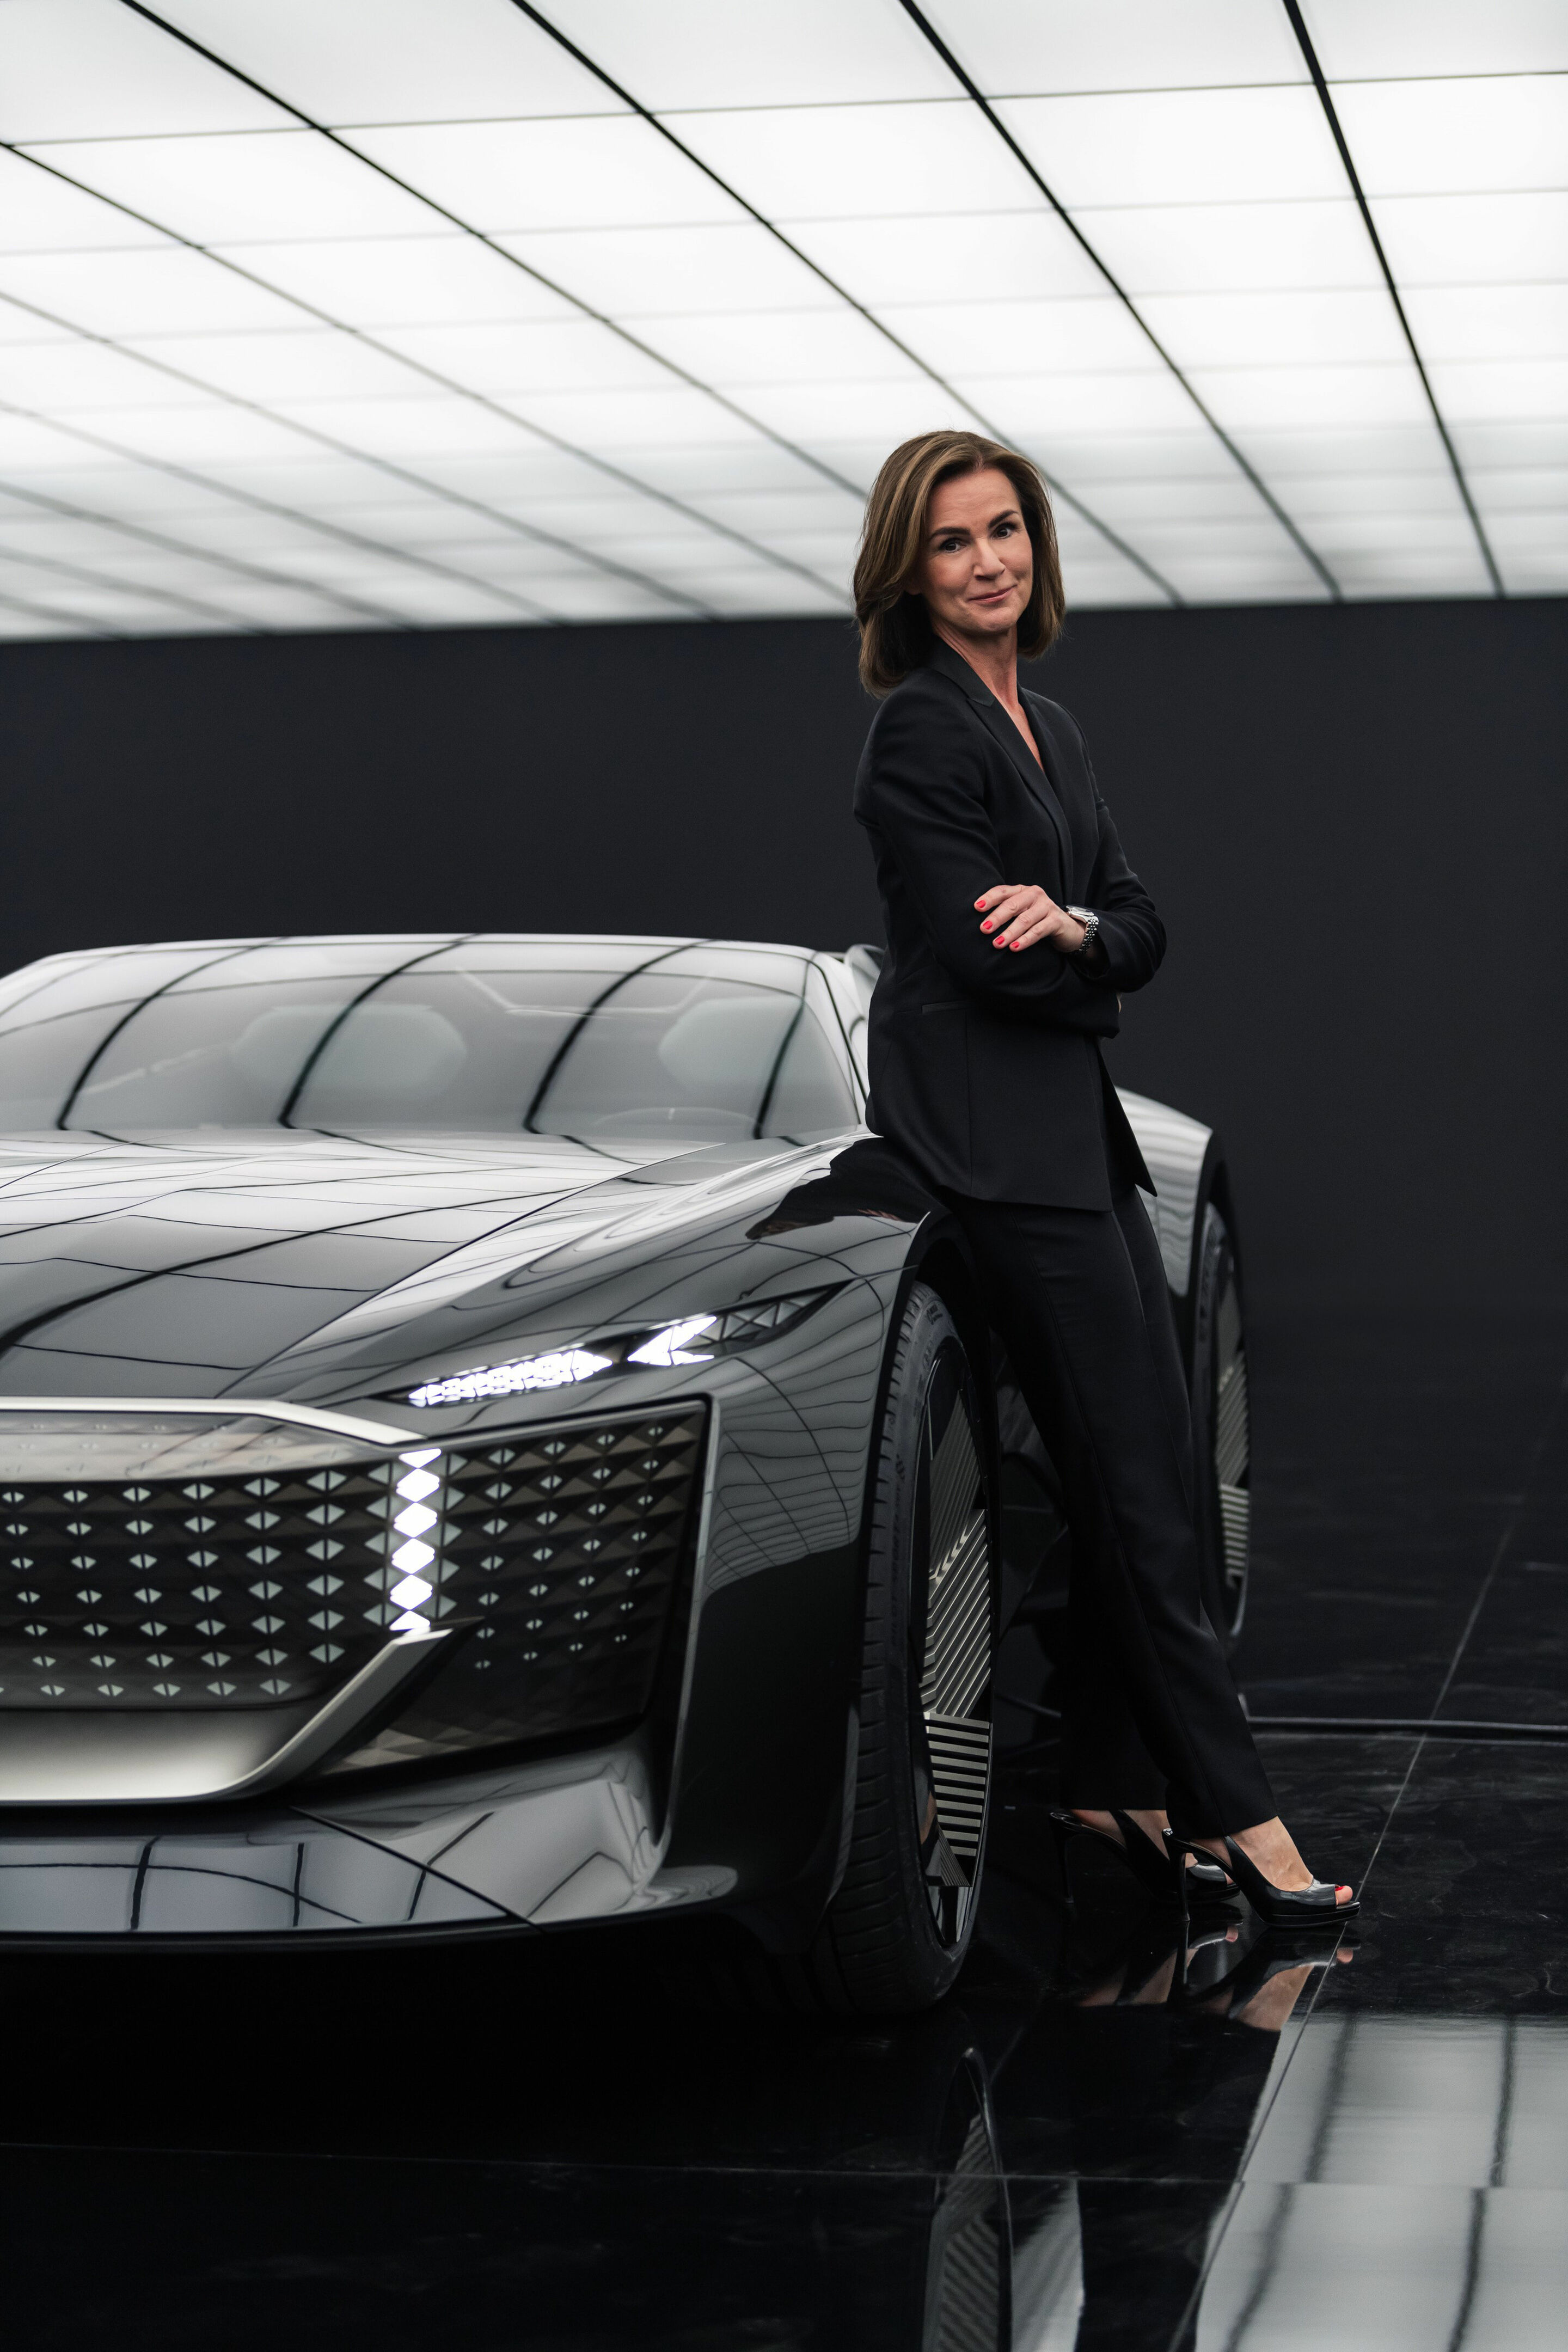 The online world premiere of the Audi skysphere concept